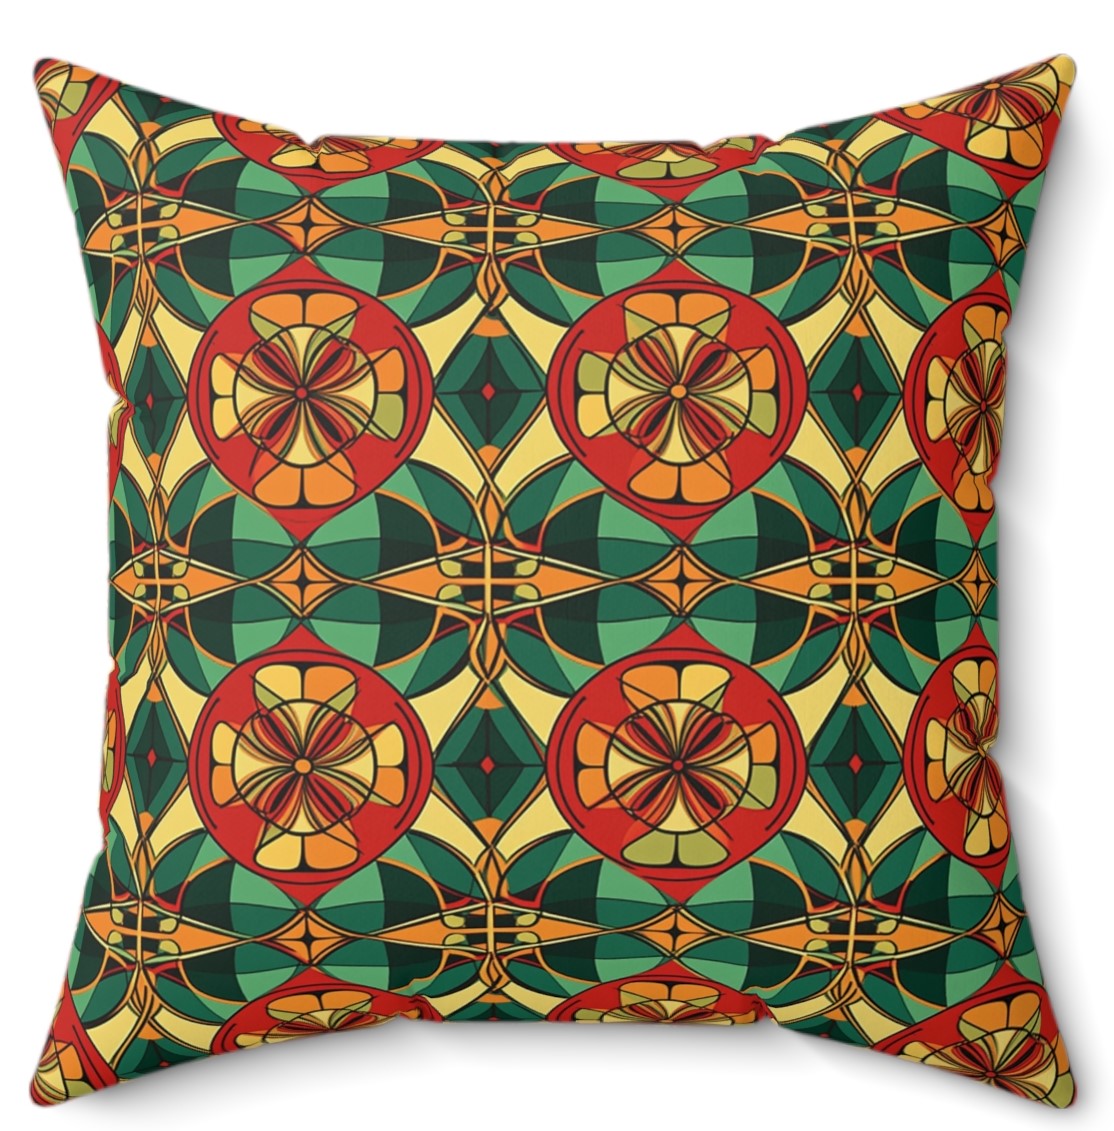 Close-up of the Ugandan Bold Geometric Pillow, highlighting the intricate and eye-catching geometric patterns inspired by Ugandan culture.